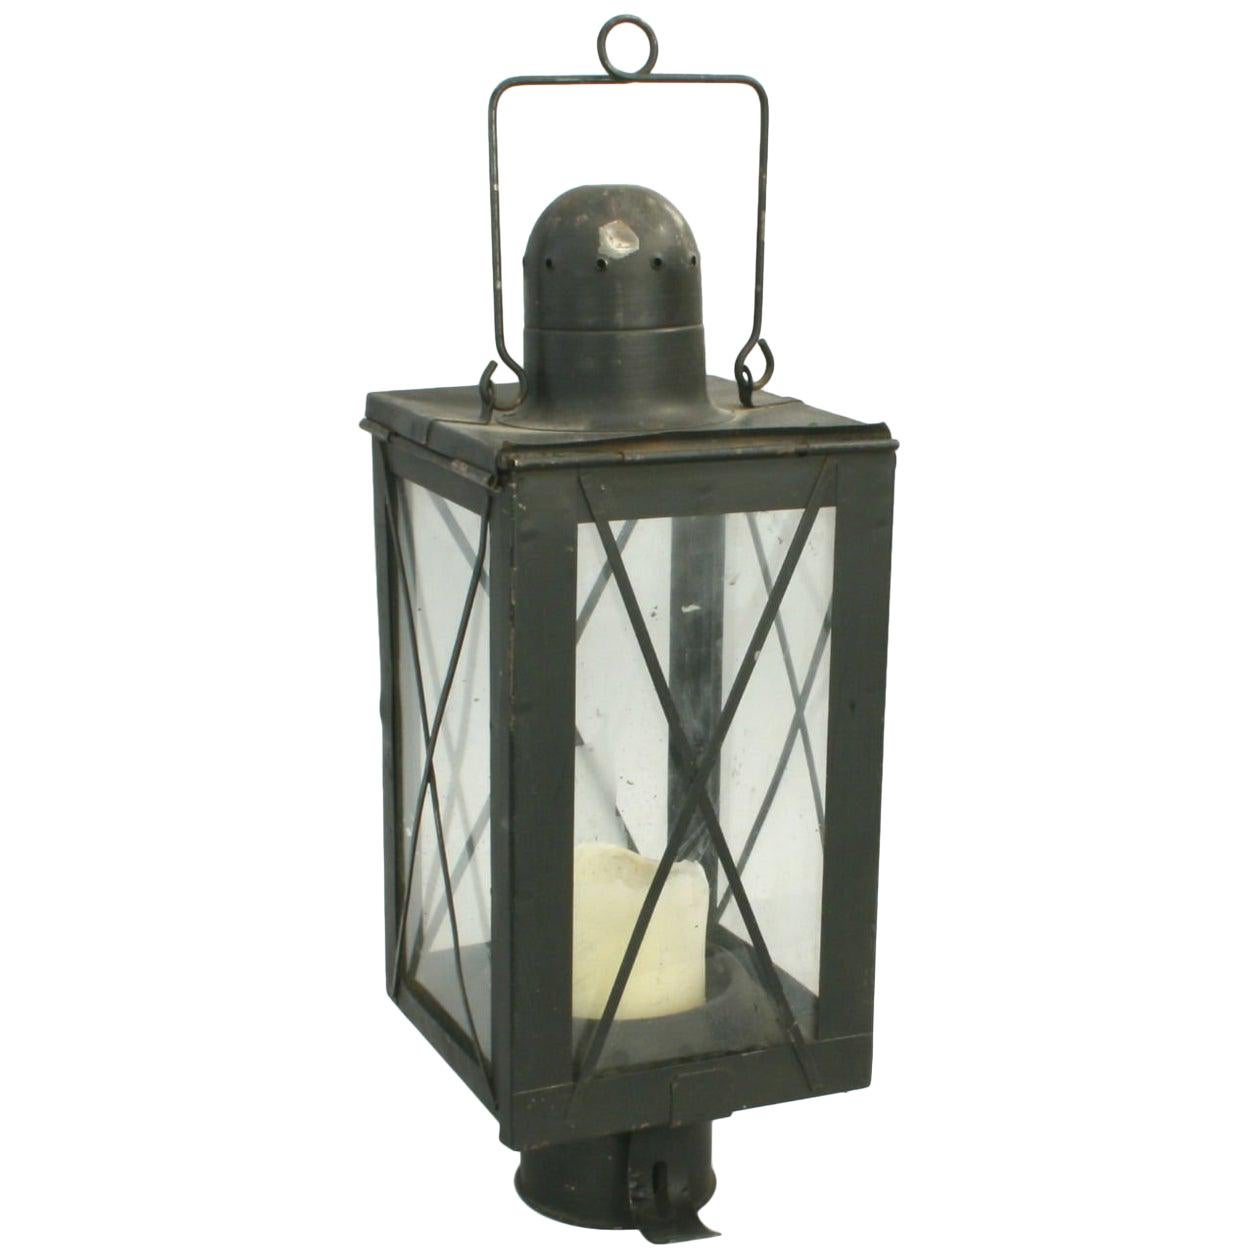 Vintage Metal Lantern with Four Glass Pains with Metal Diagonal Protection Rods